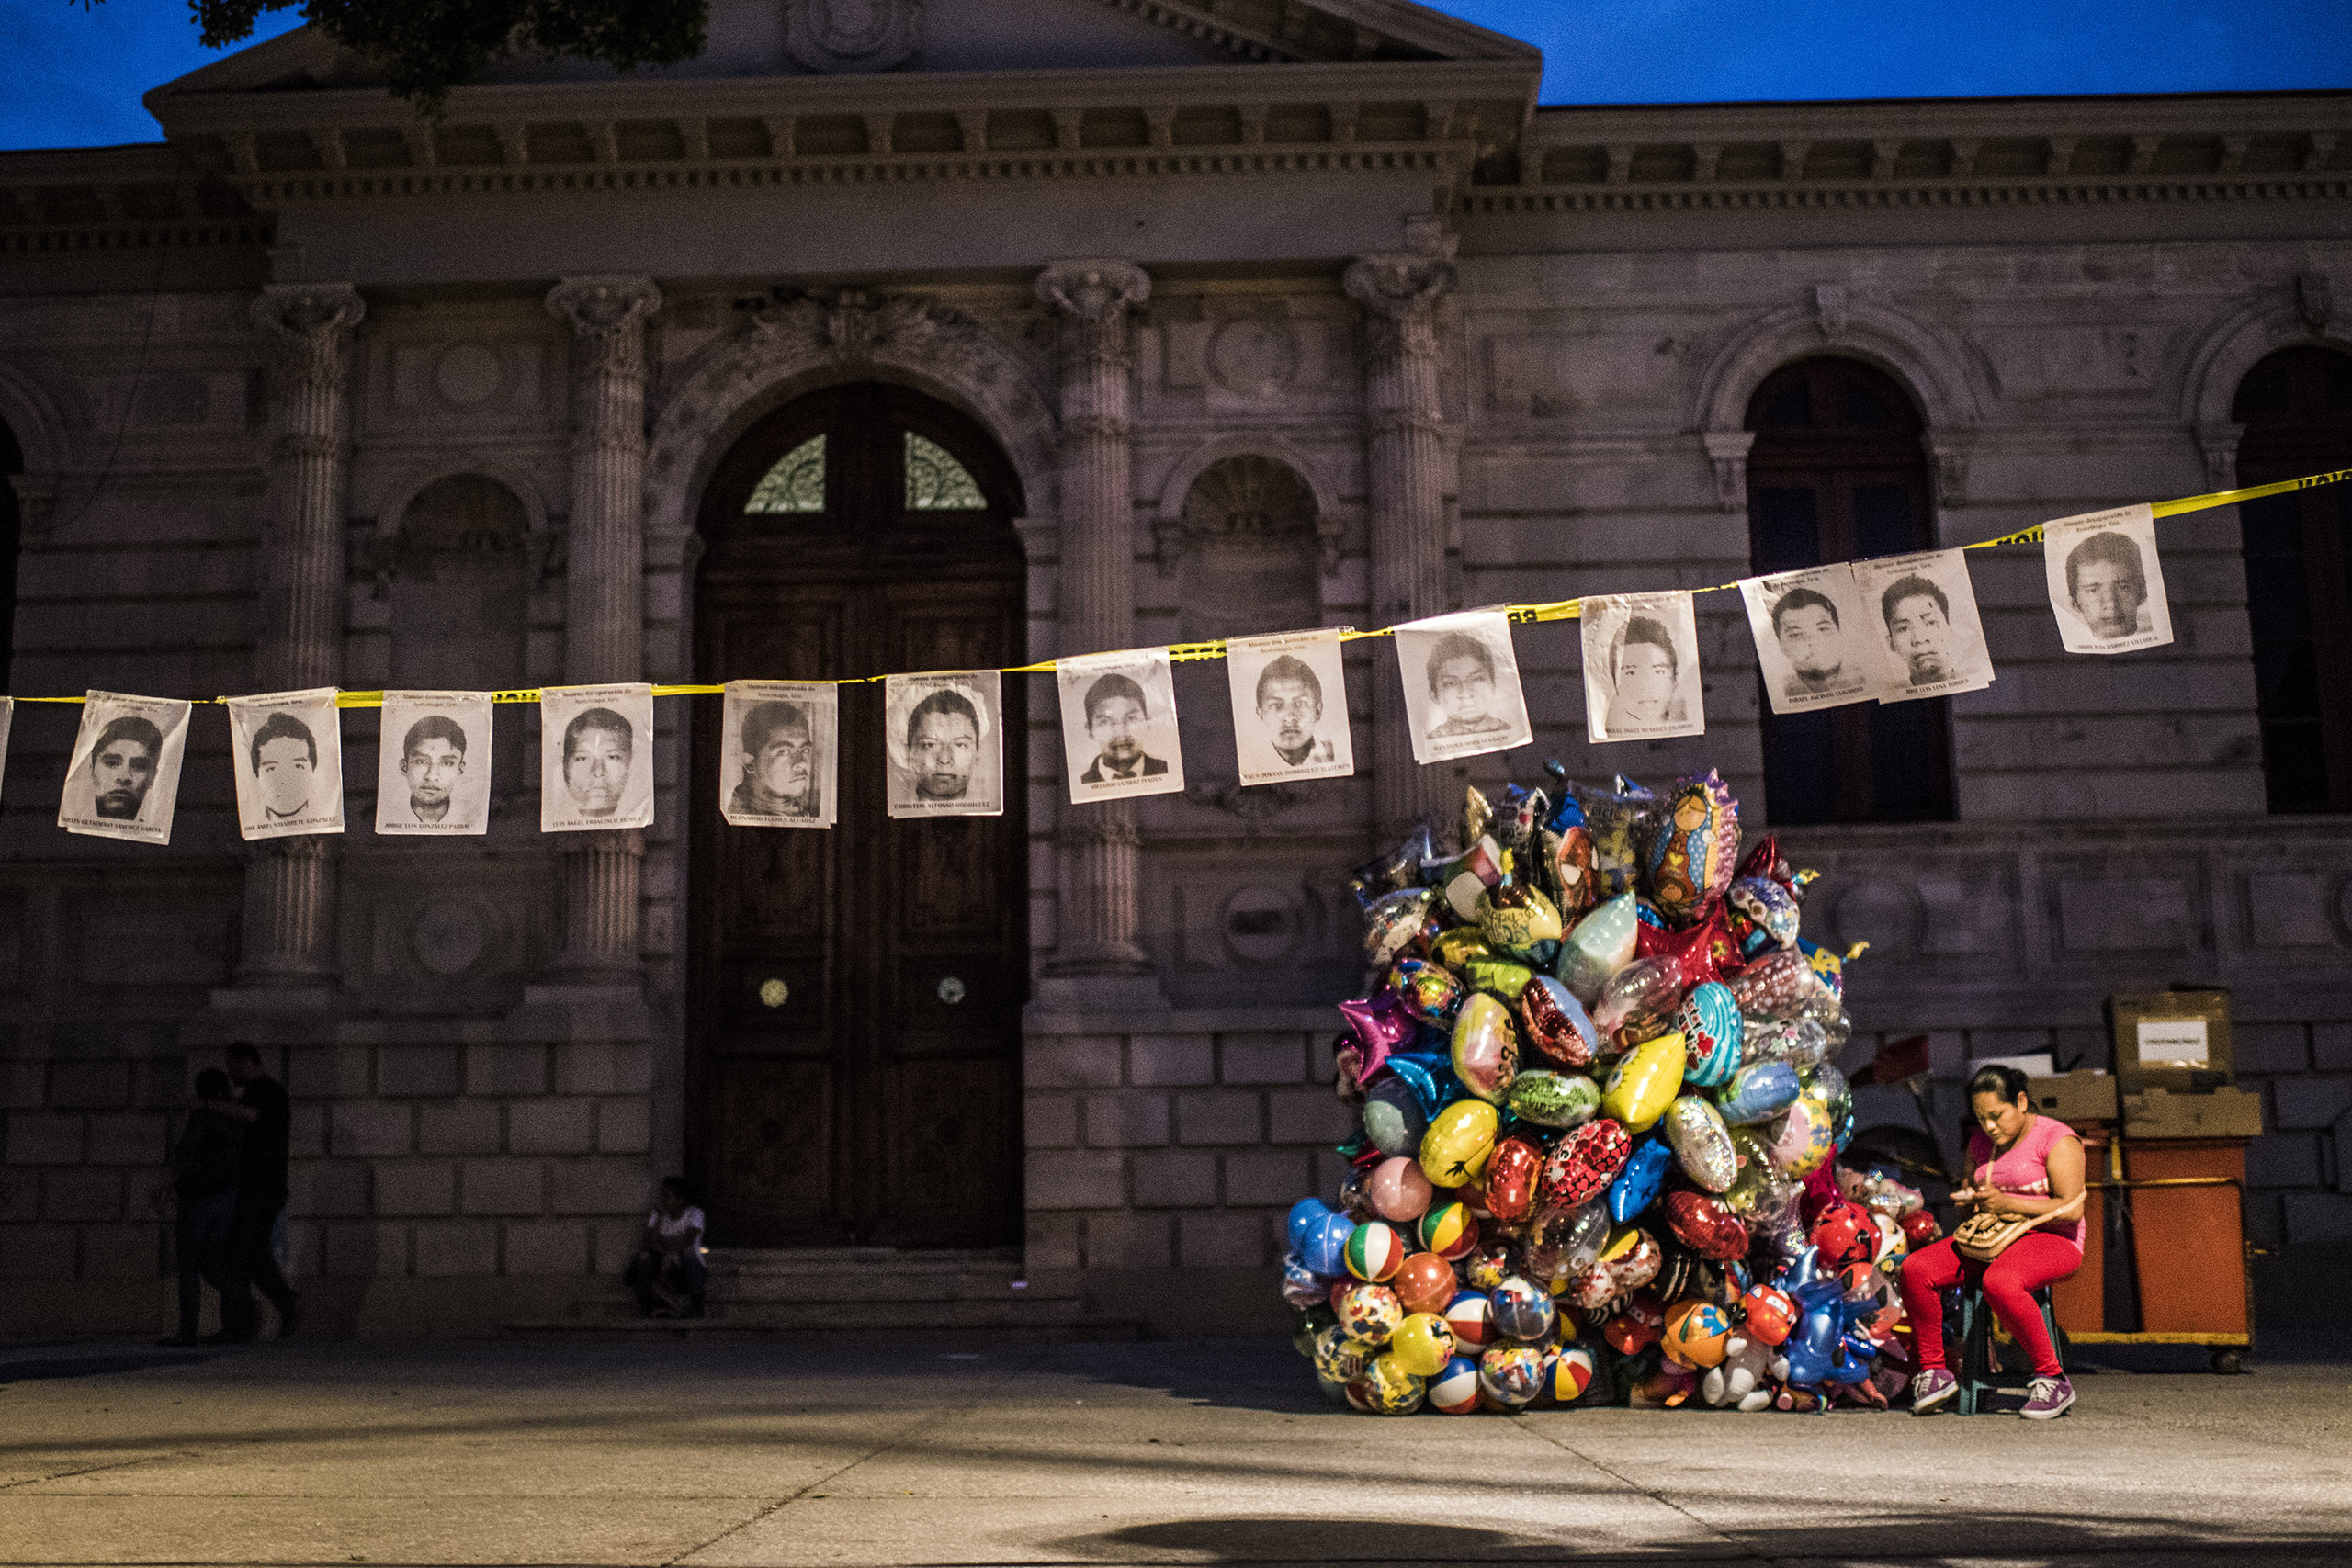 Grim memorial Portraits of the missing students hang in the main square of Chilpancingo, the capital of Guerrero state. (Photograph by Sebastian Liste—NOOR for TIME)